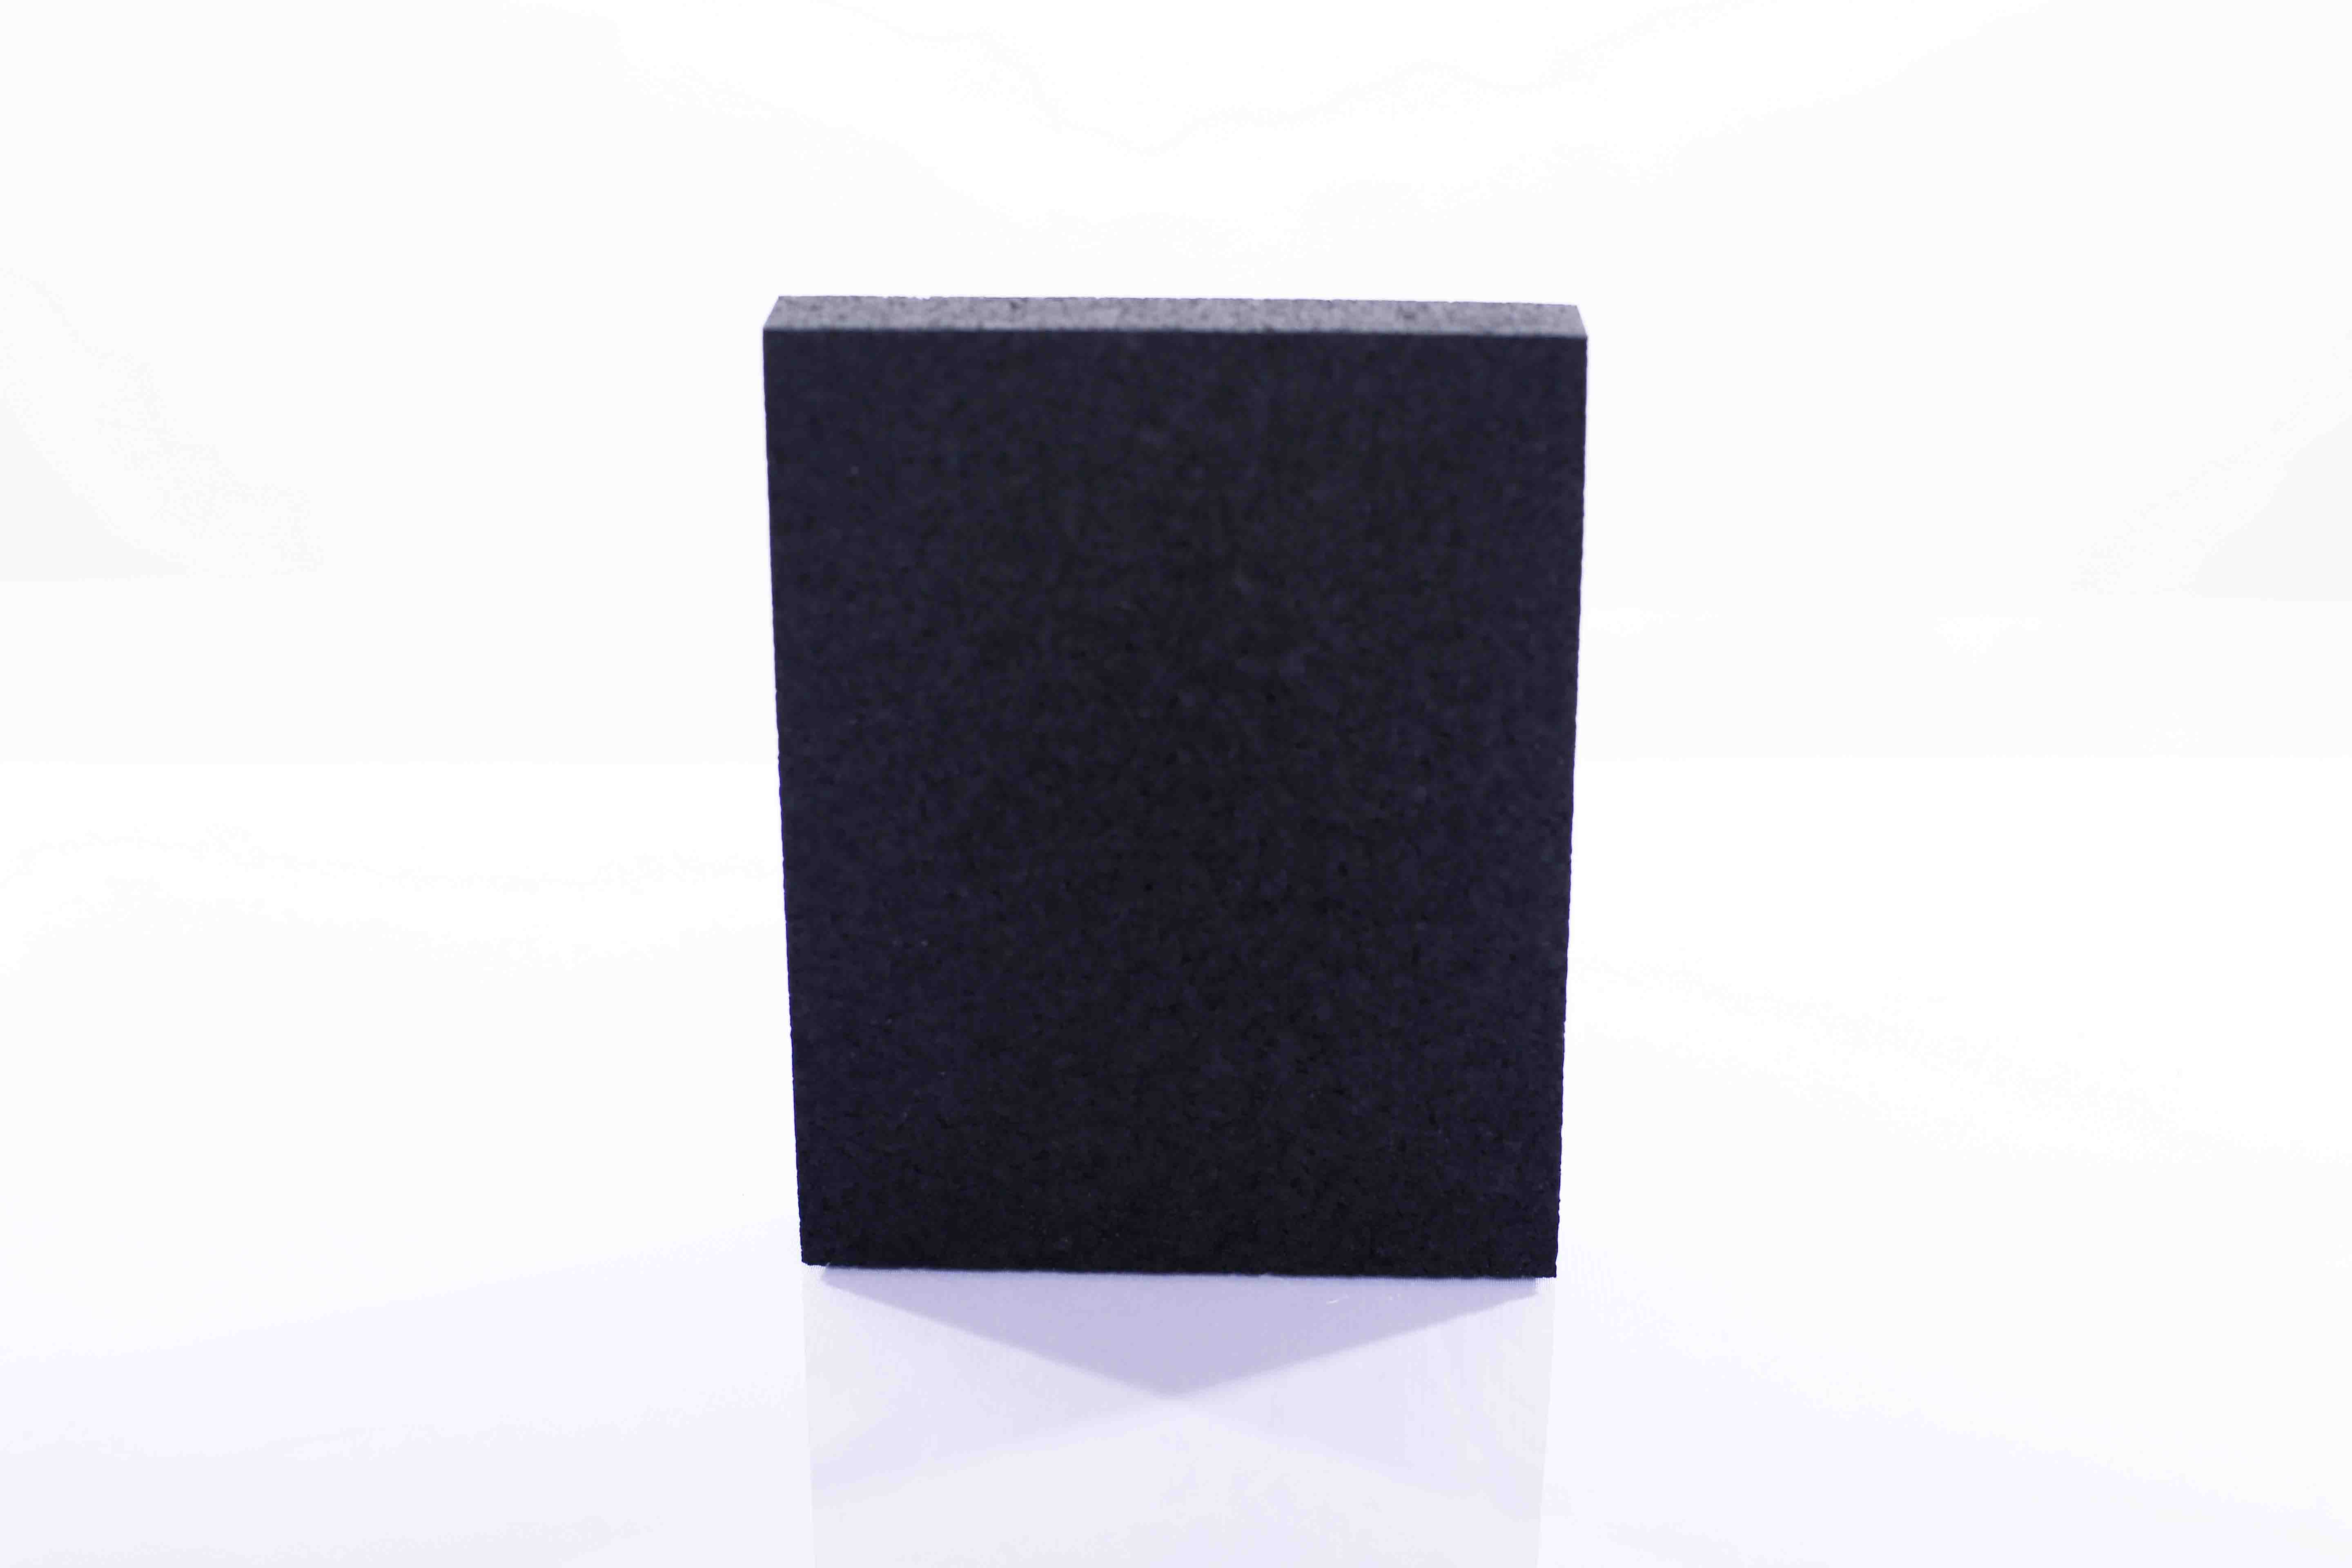 Acoustic insulation with open cell structure 6mm in thickness Featured Image